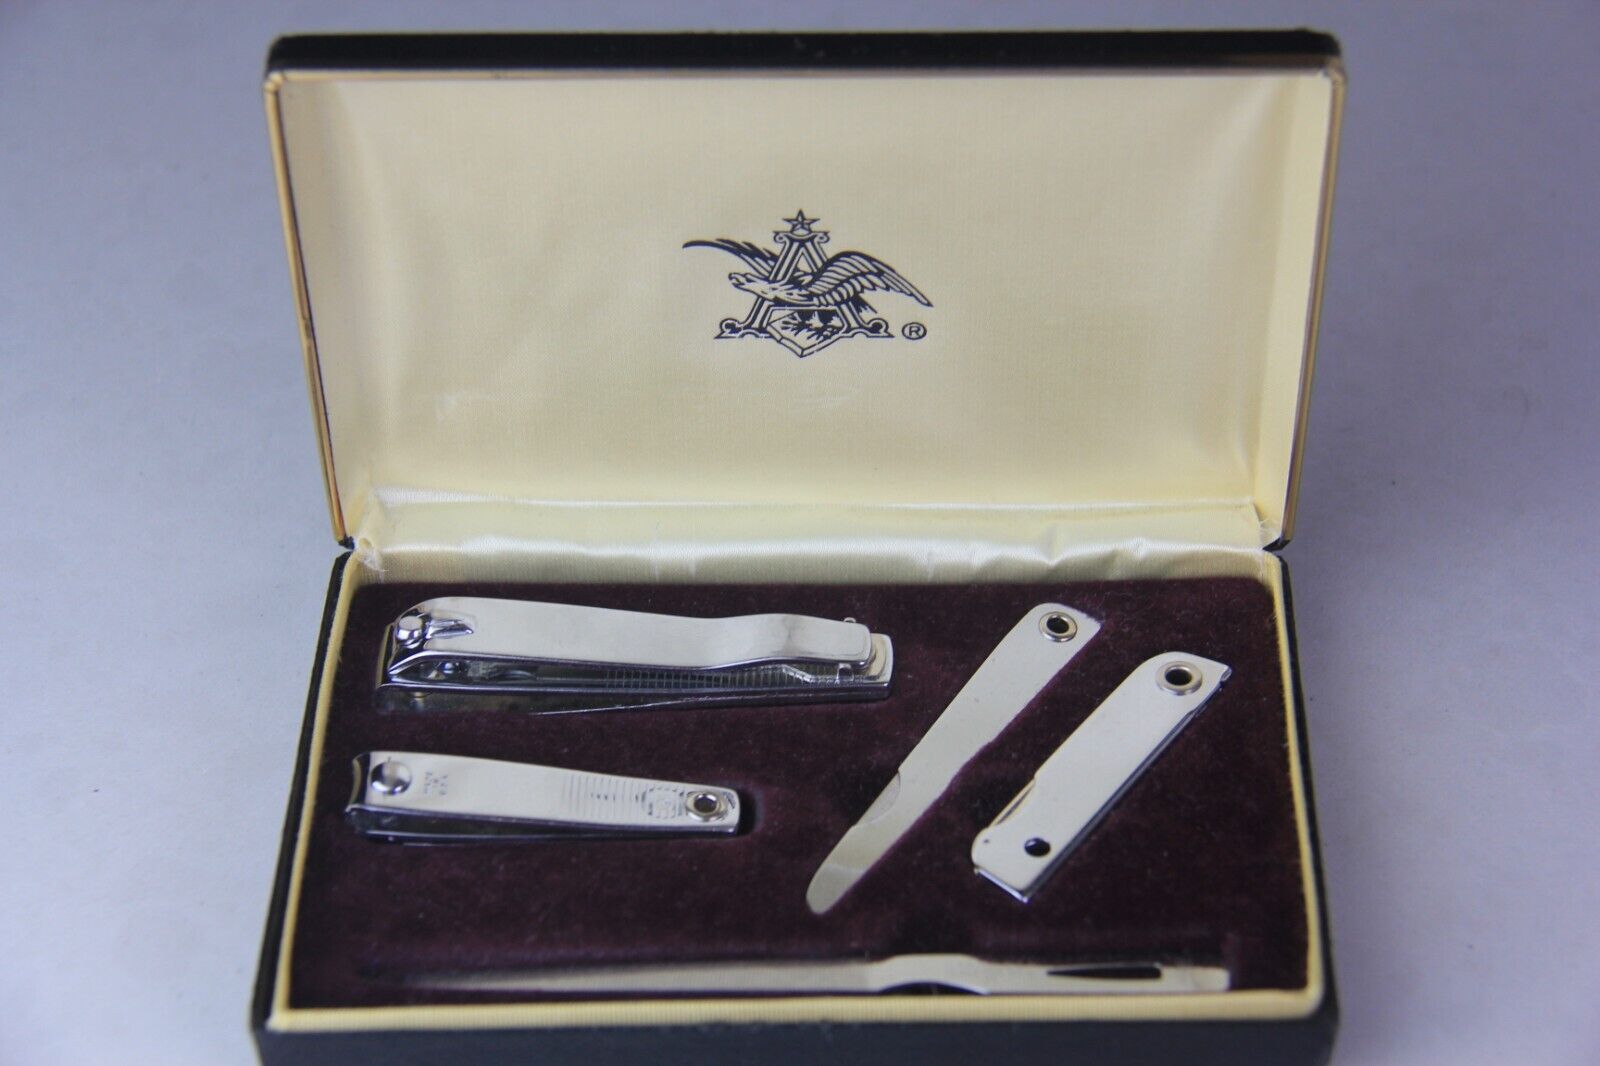 VTG 1972 Budweiser Sales Convention Complimentary Manicure Gift Set